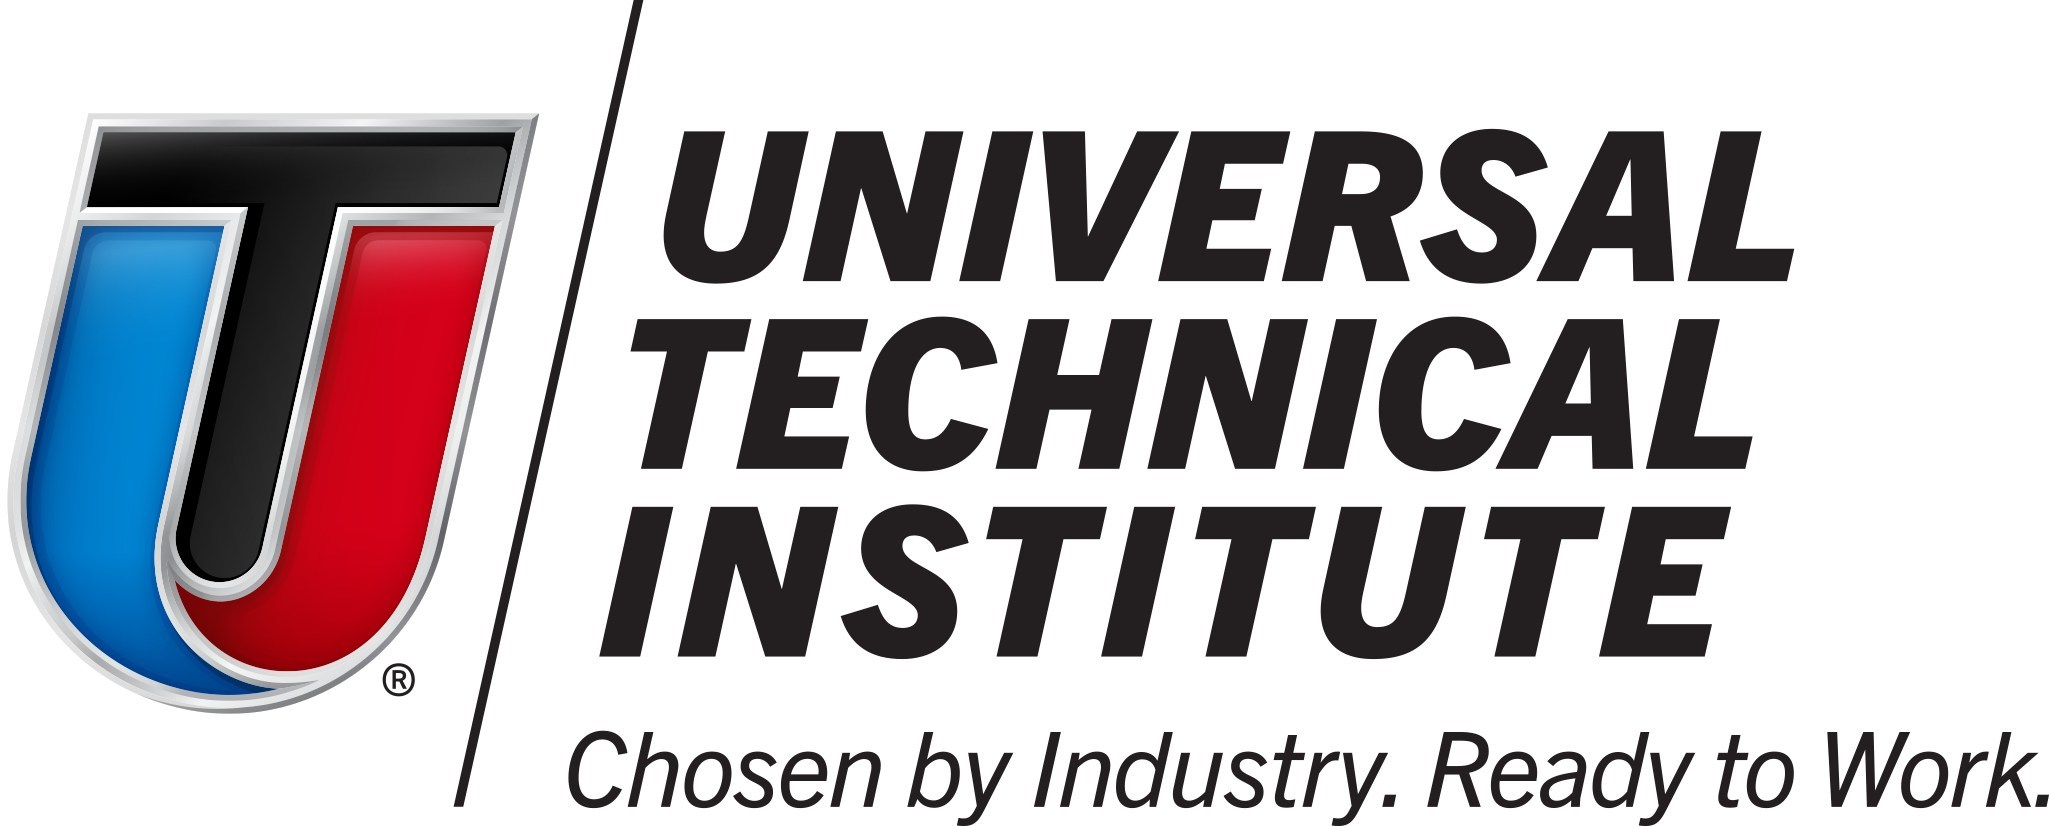 Universal Technical Institute Joins Economic Index | THE SHOP